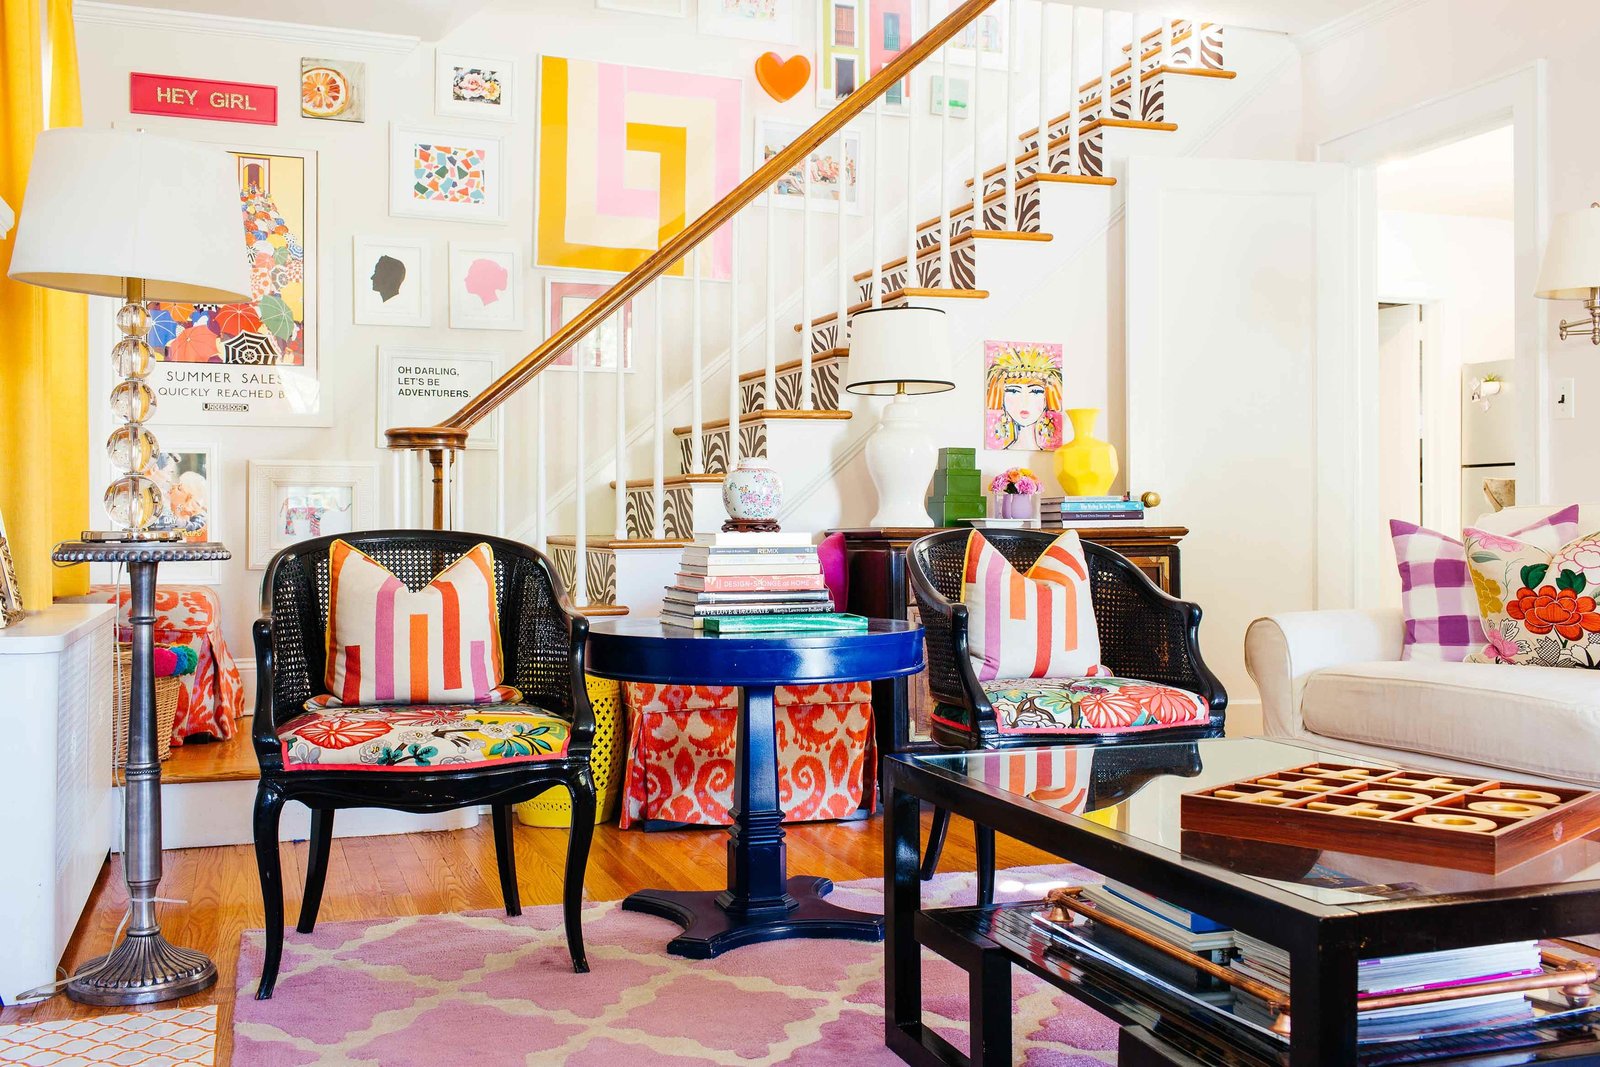 A colorfully decorated living room with a staircase backdrop.